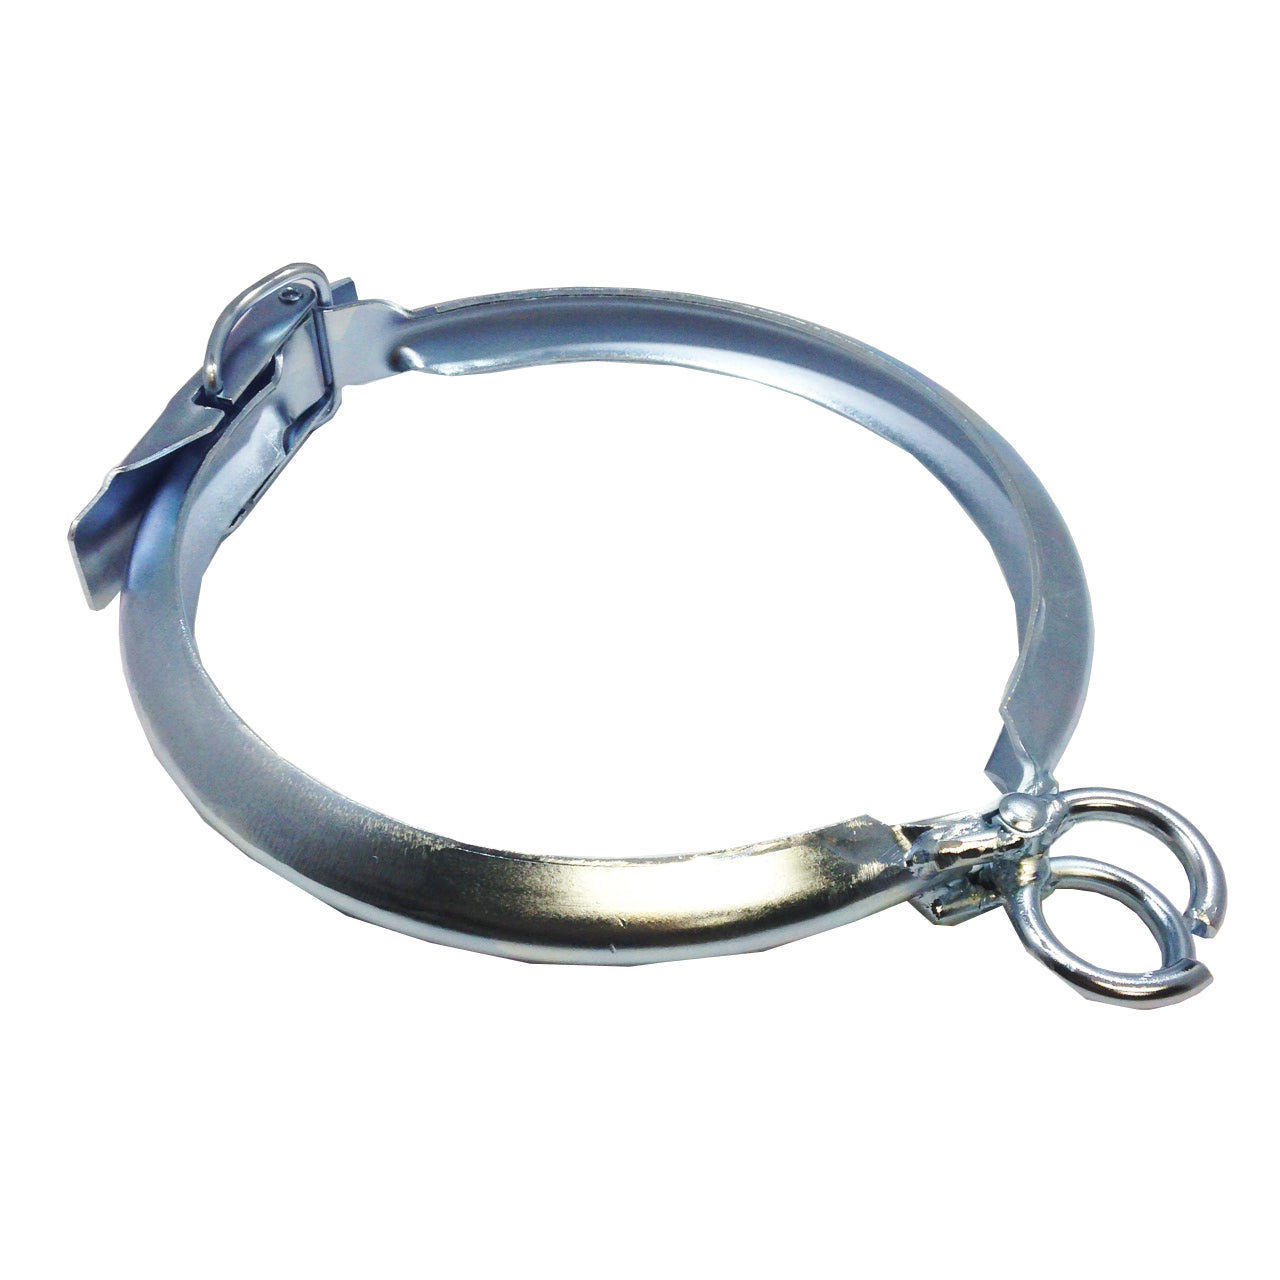 Tube hose clamp for hydro excavation equipment